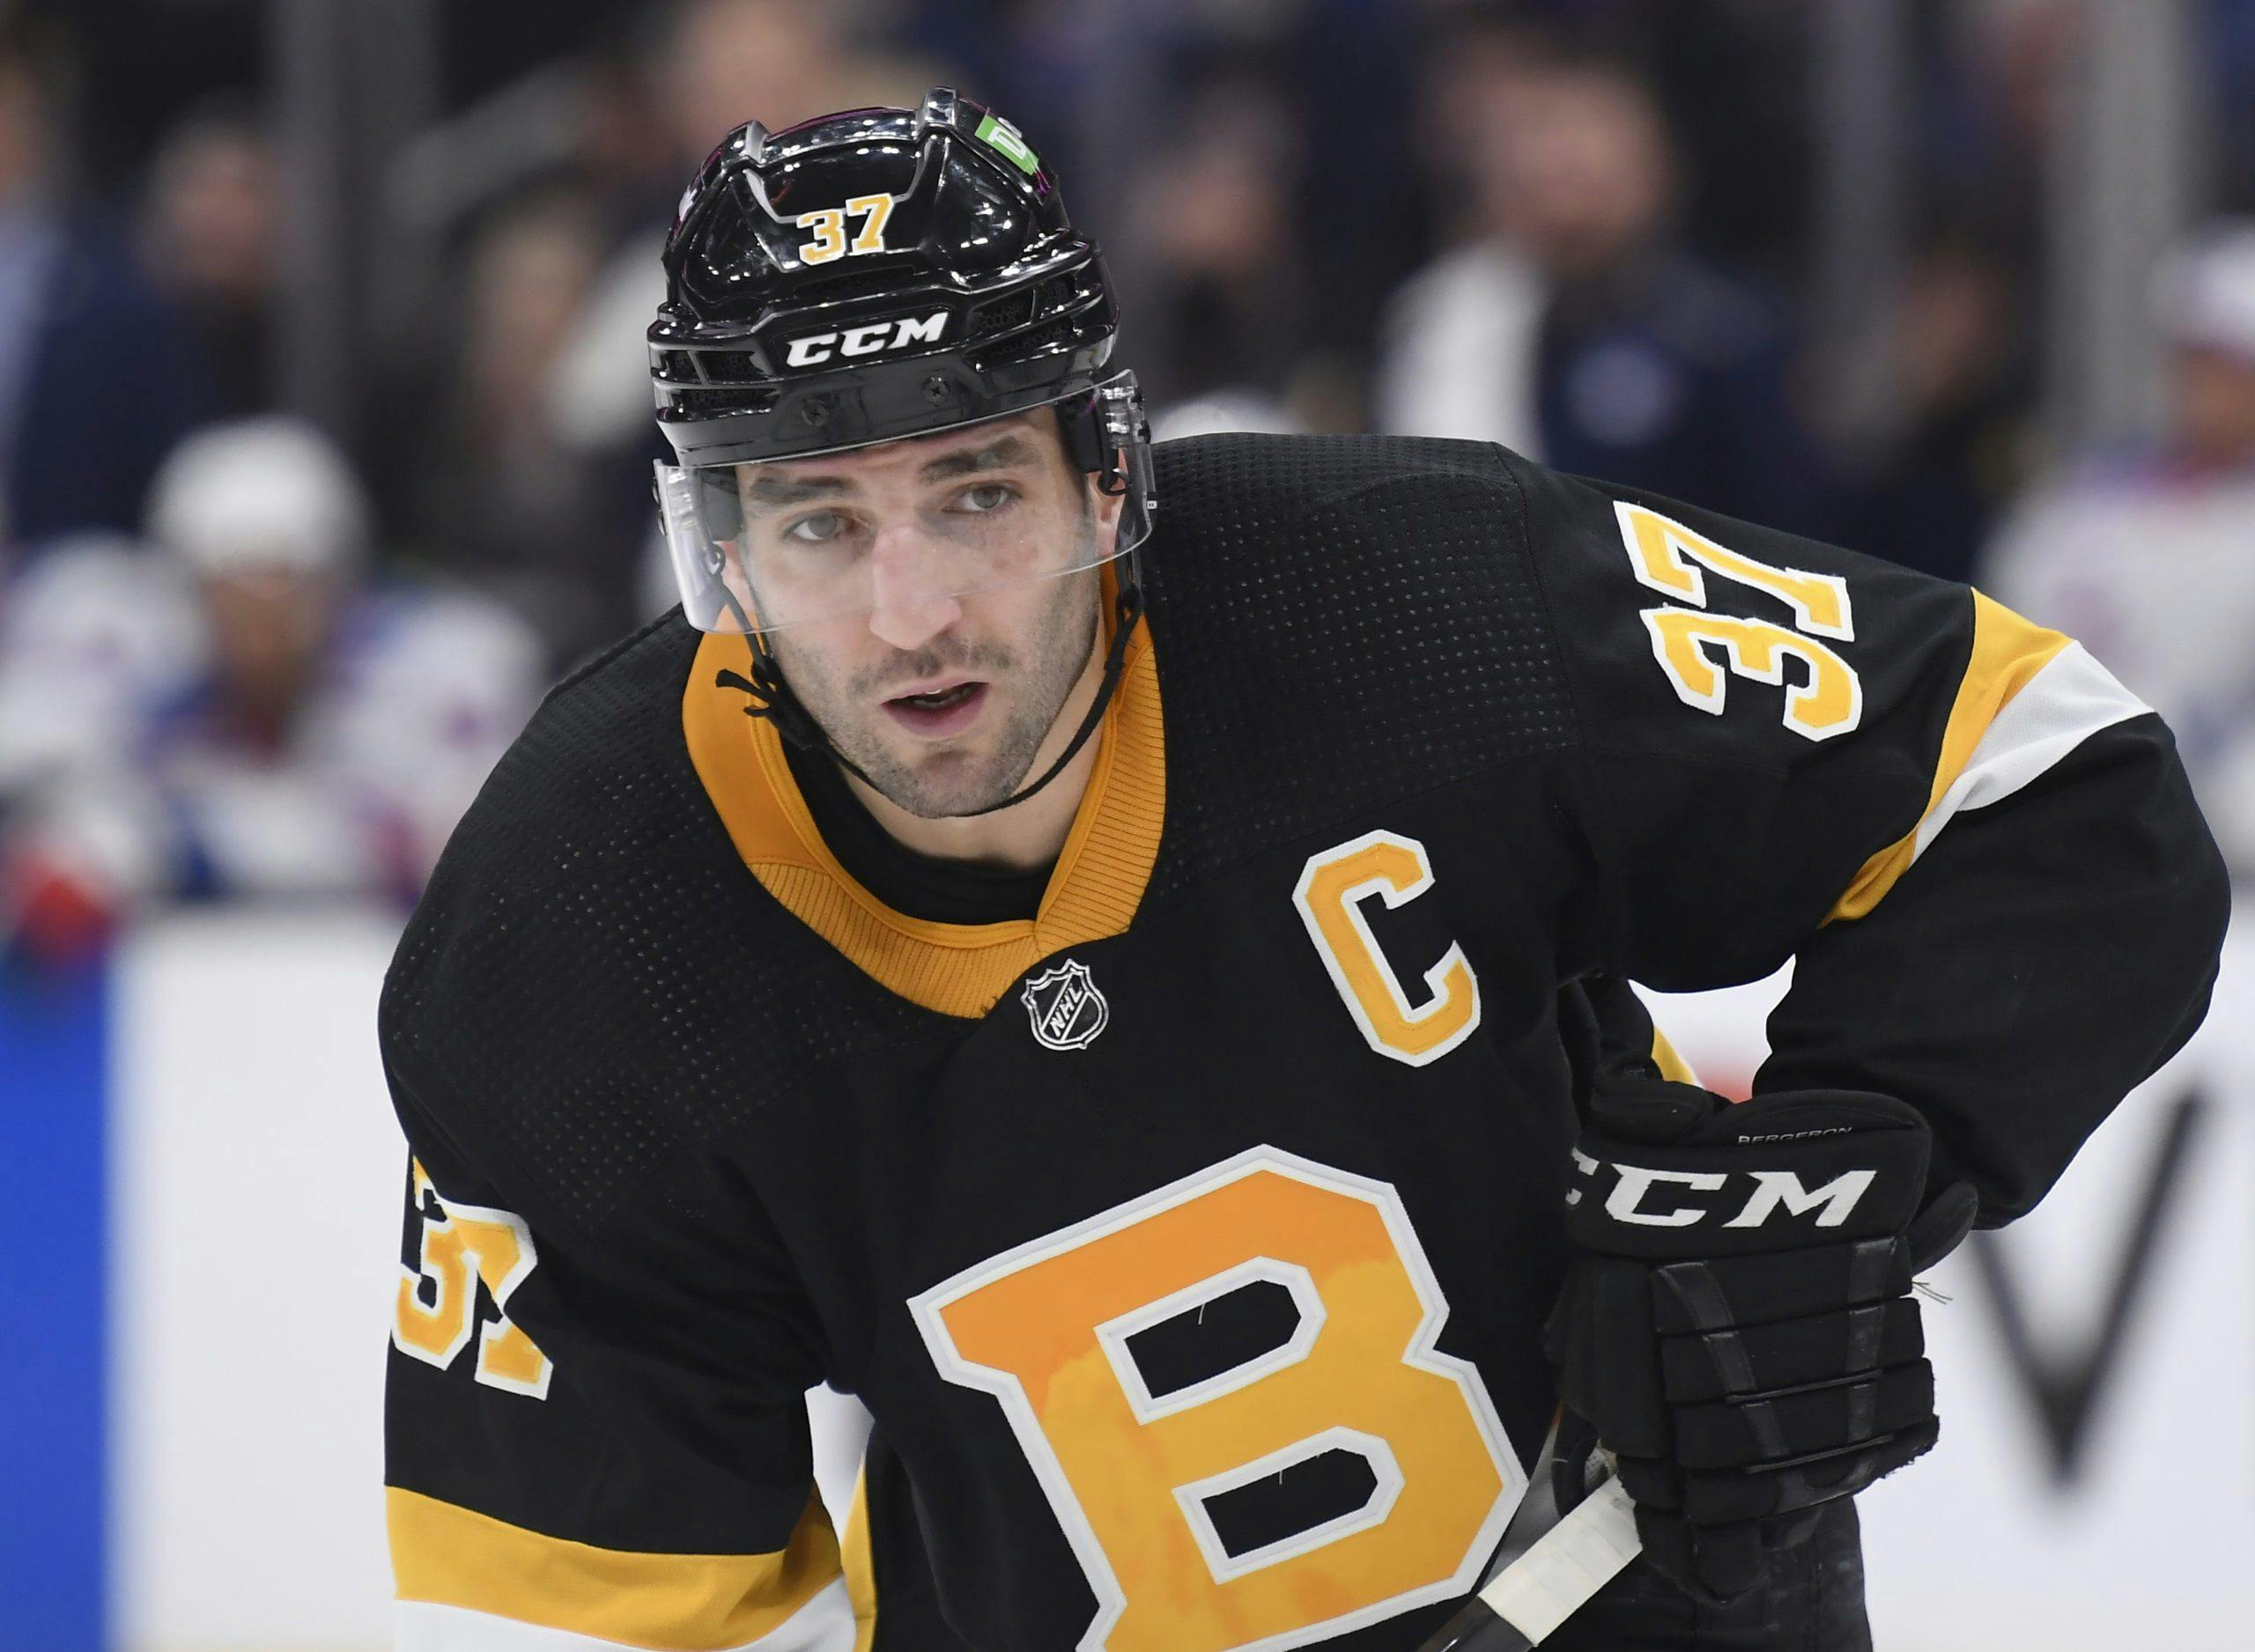 Bruins forward Patrice Bergeron sets new NHL record with fifth Selke Trophy